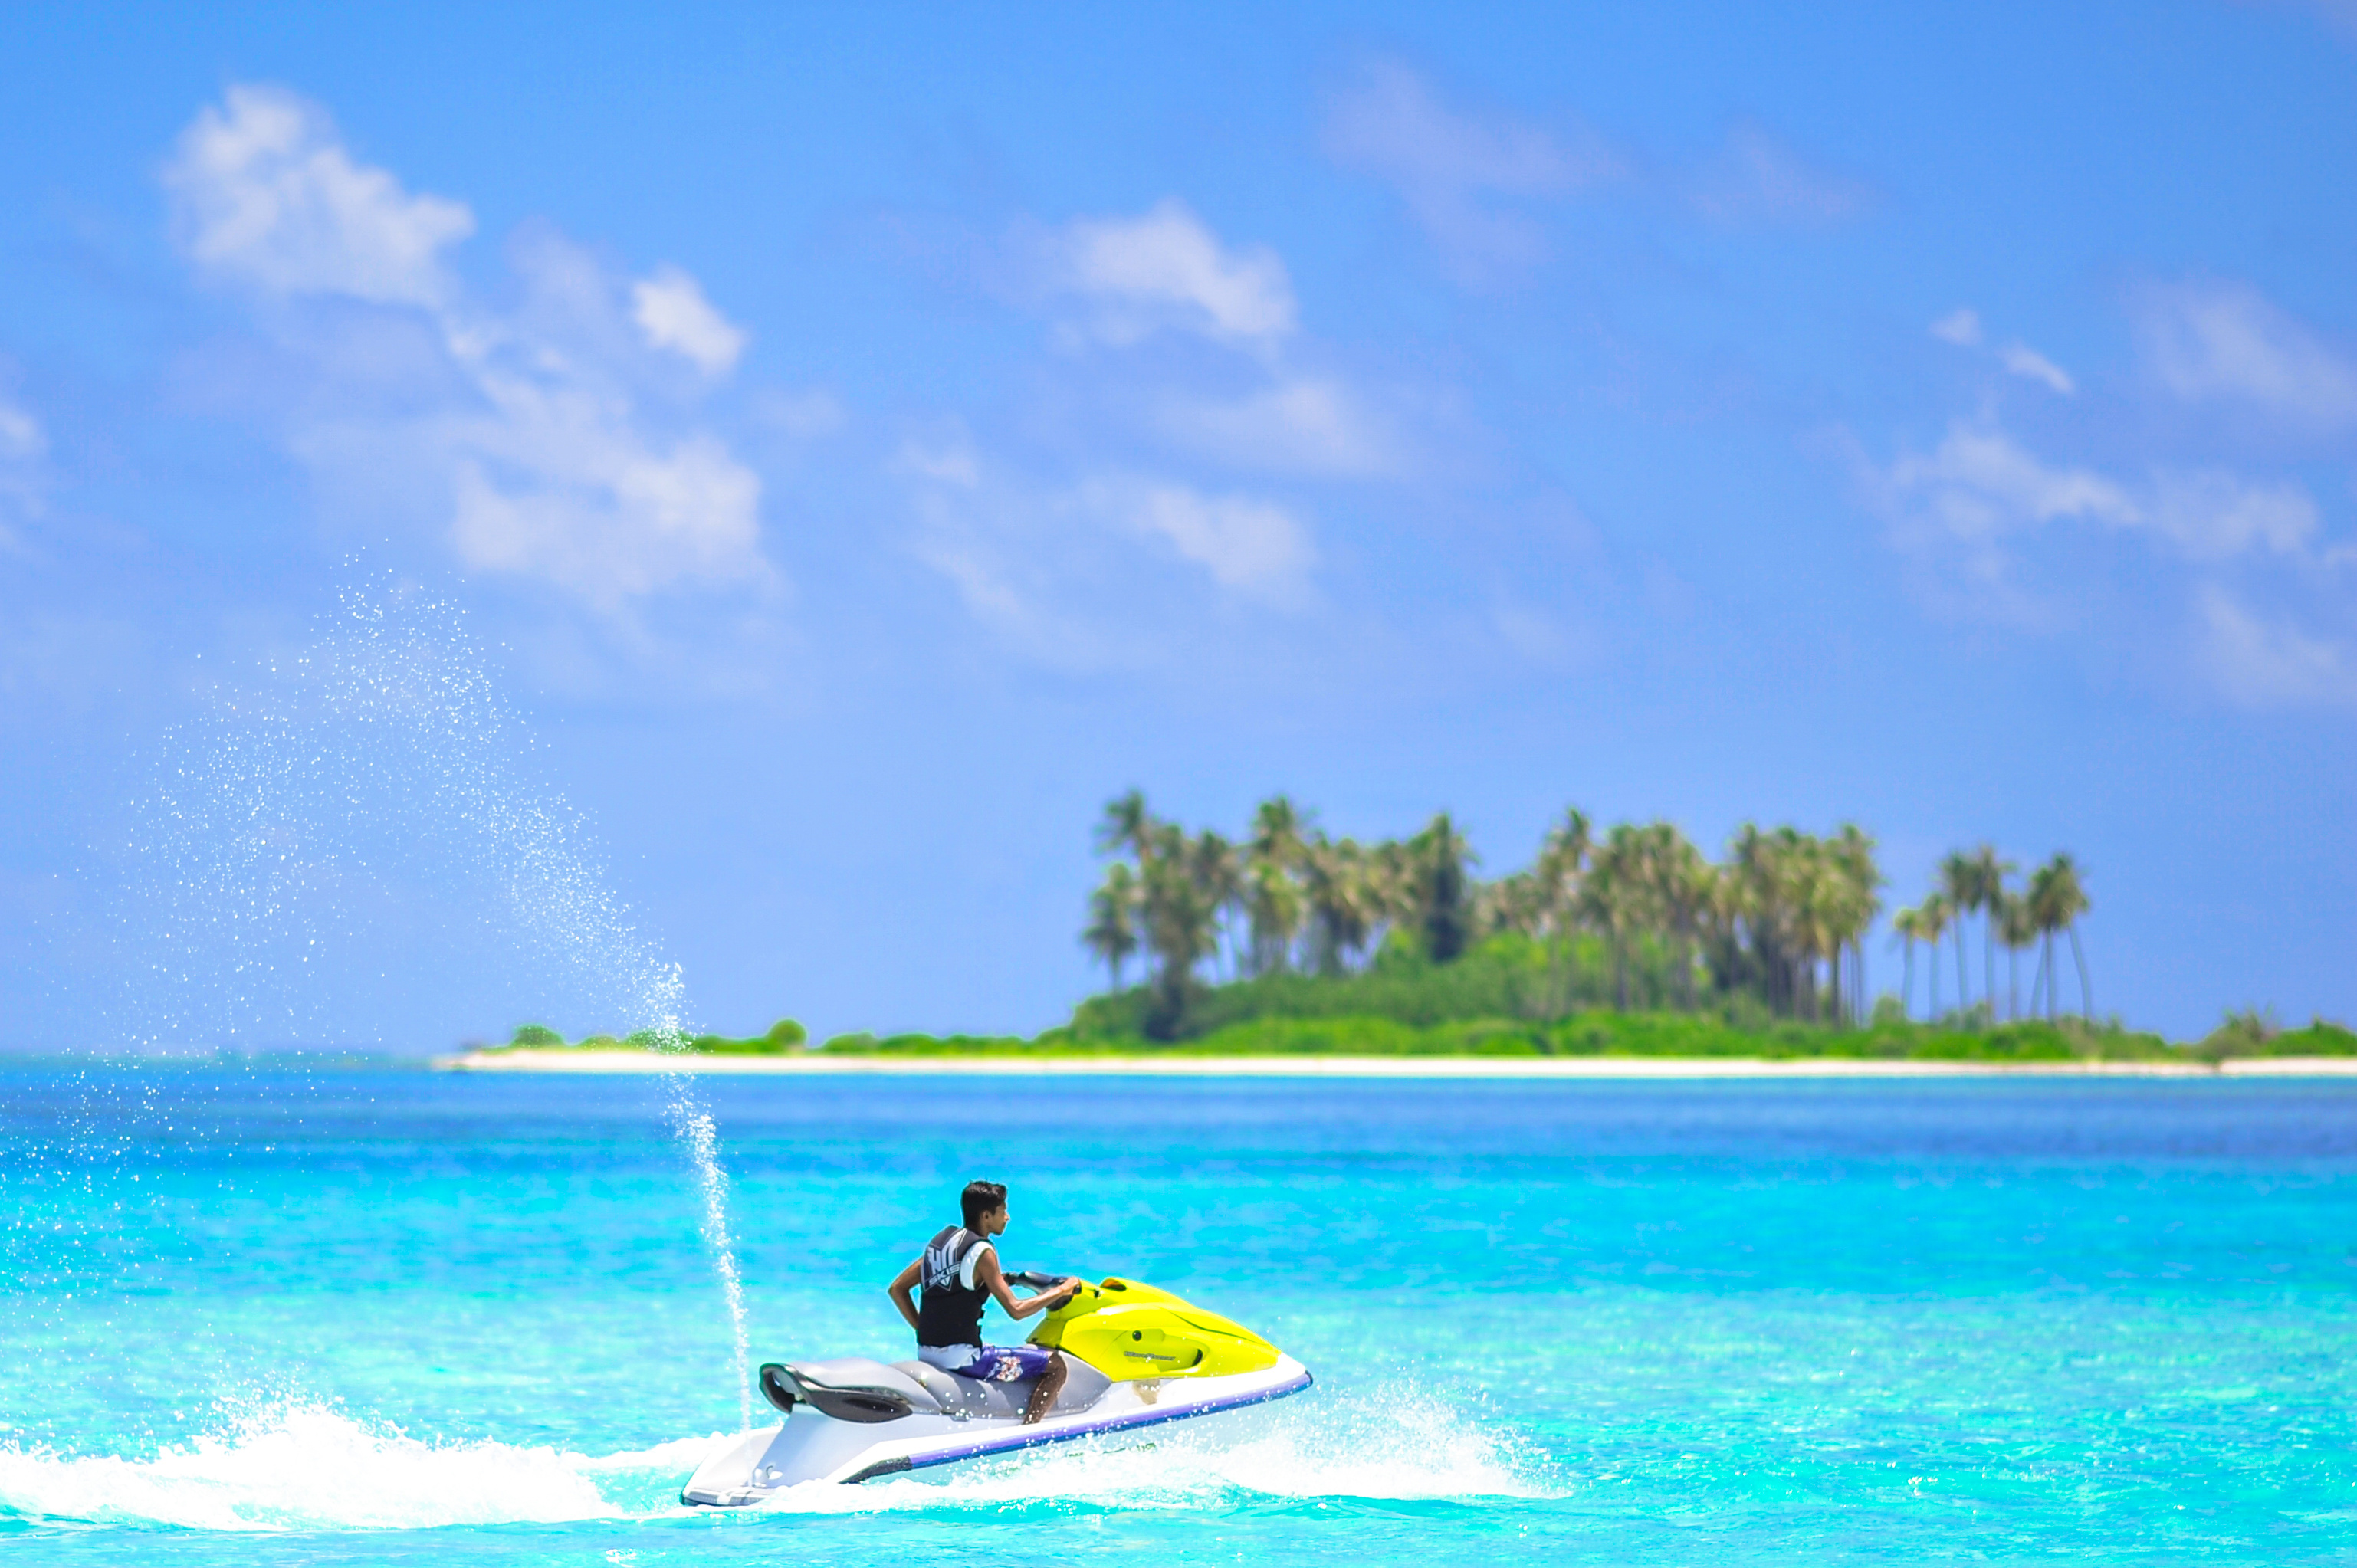 Jet Ski: A small jet-propelled vehicle, Skimming across the surface of the water. 3080x2050 HD Wallpaper.